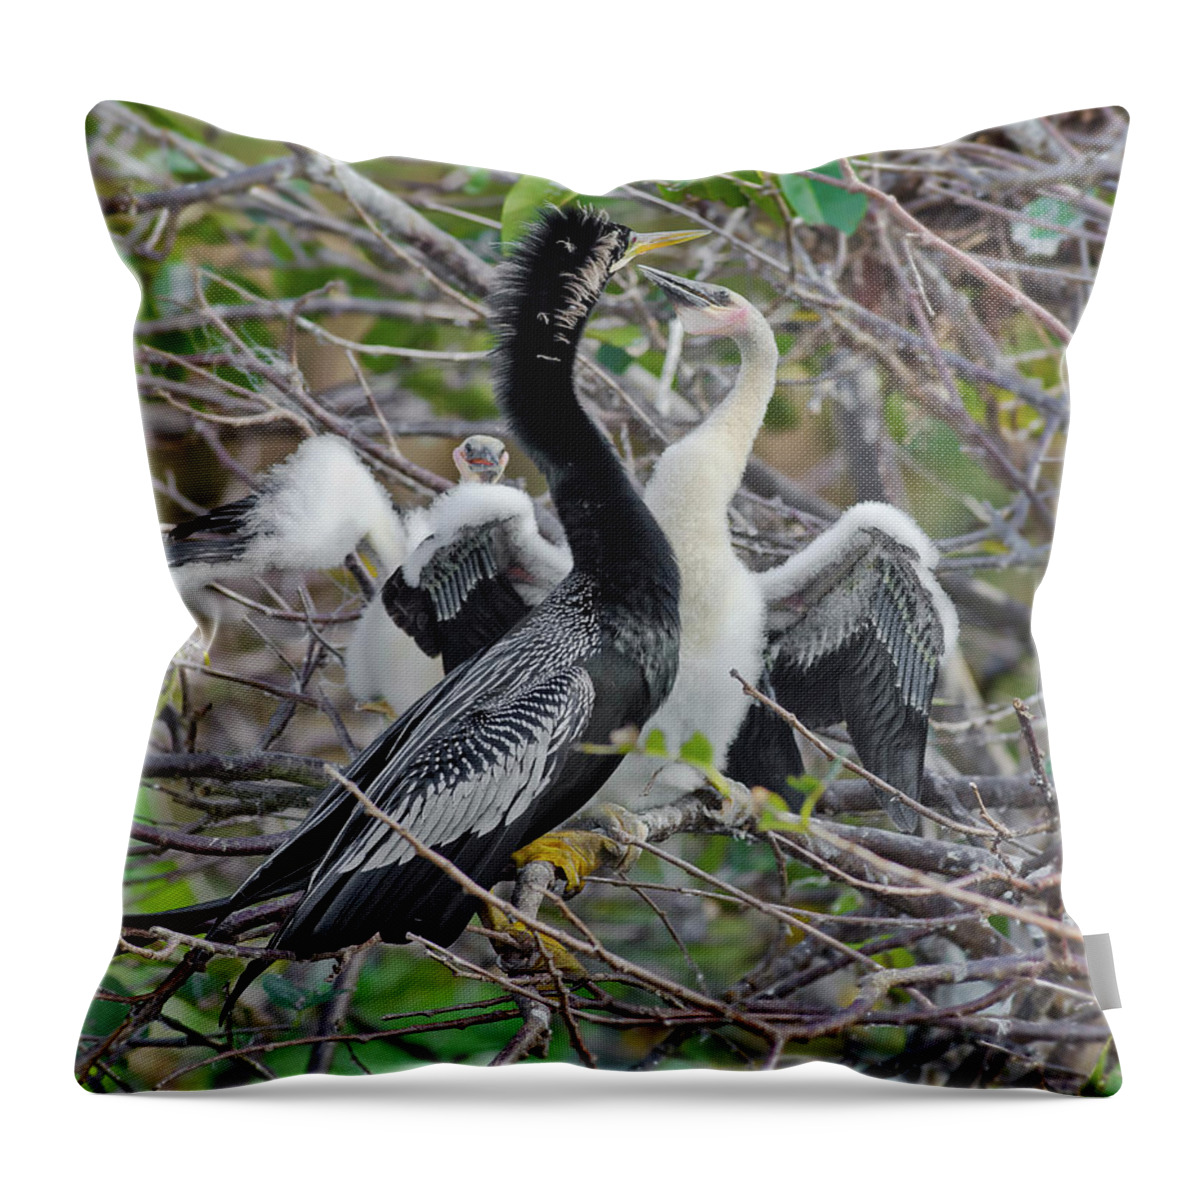 Male Anhinga And Chicks Throw Pillow featuring the photograph Male Anhinga And Chicks by Morris Finkelstein